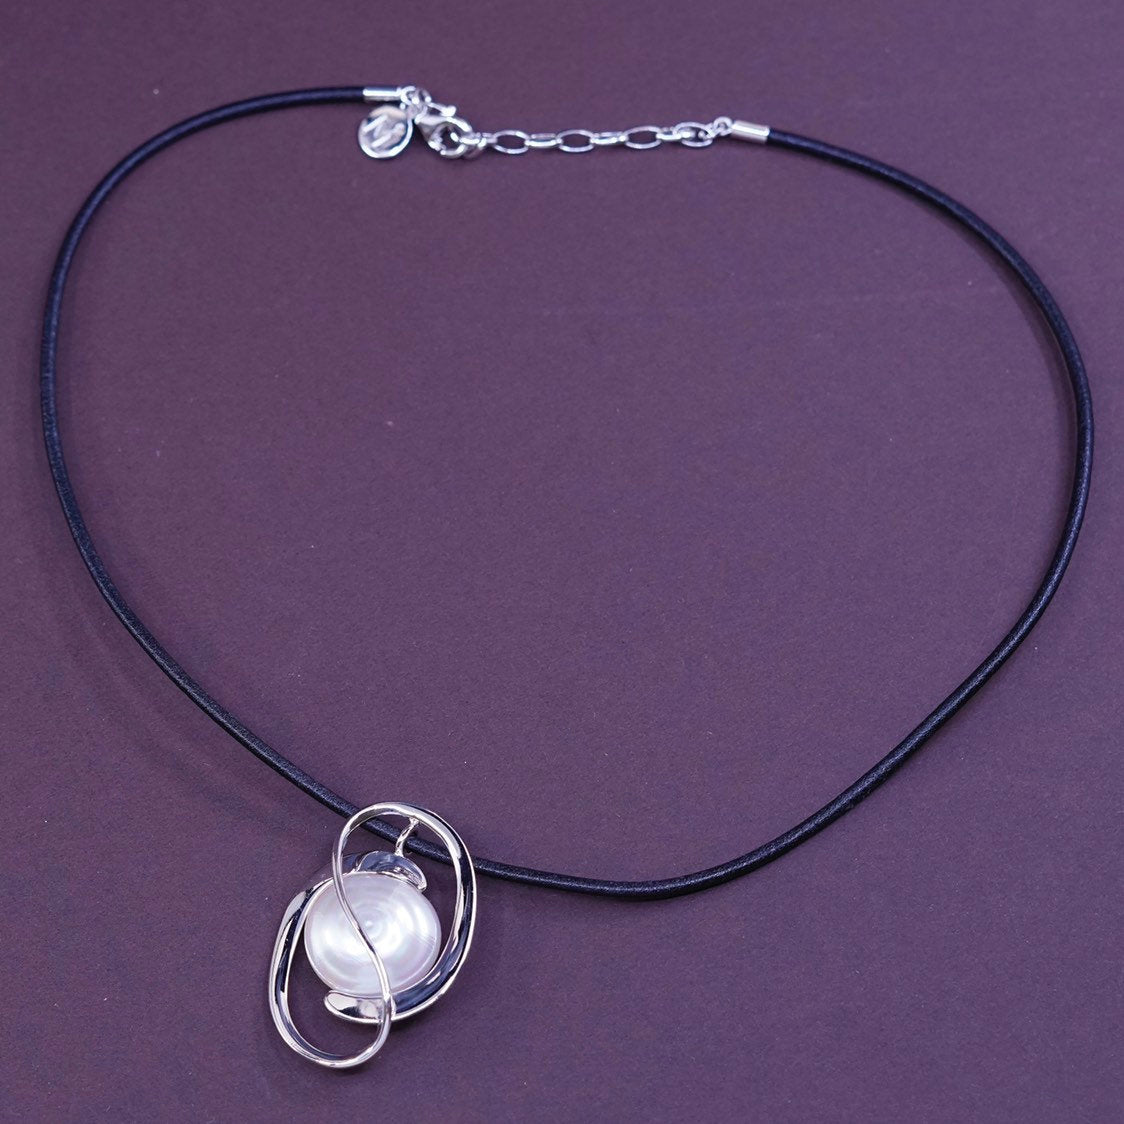 15+2", Sterling silver handmade necklace, 925 pearl Pendant w/ leather chain